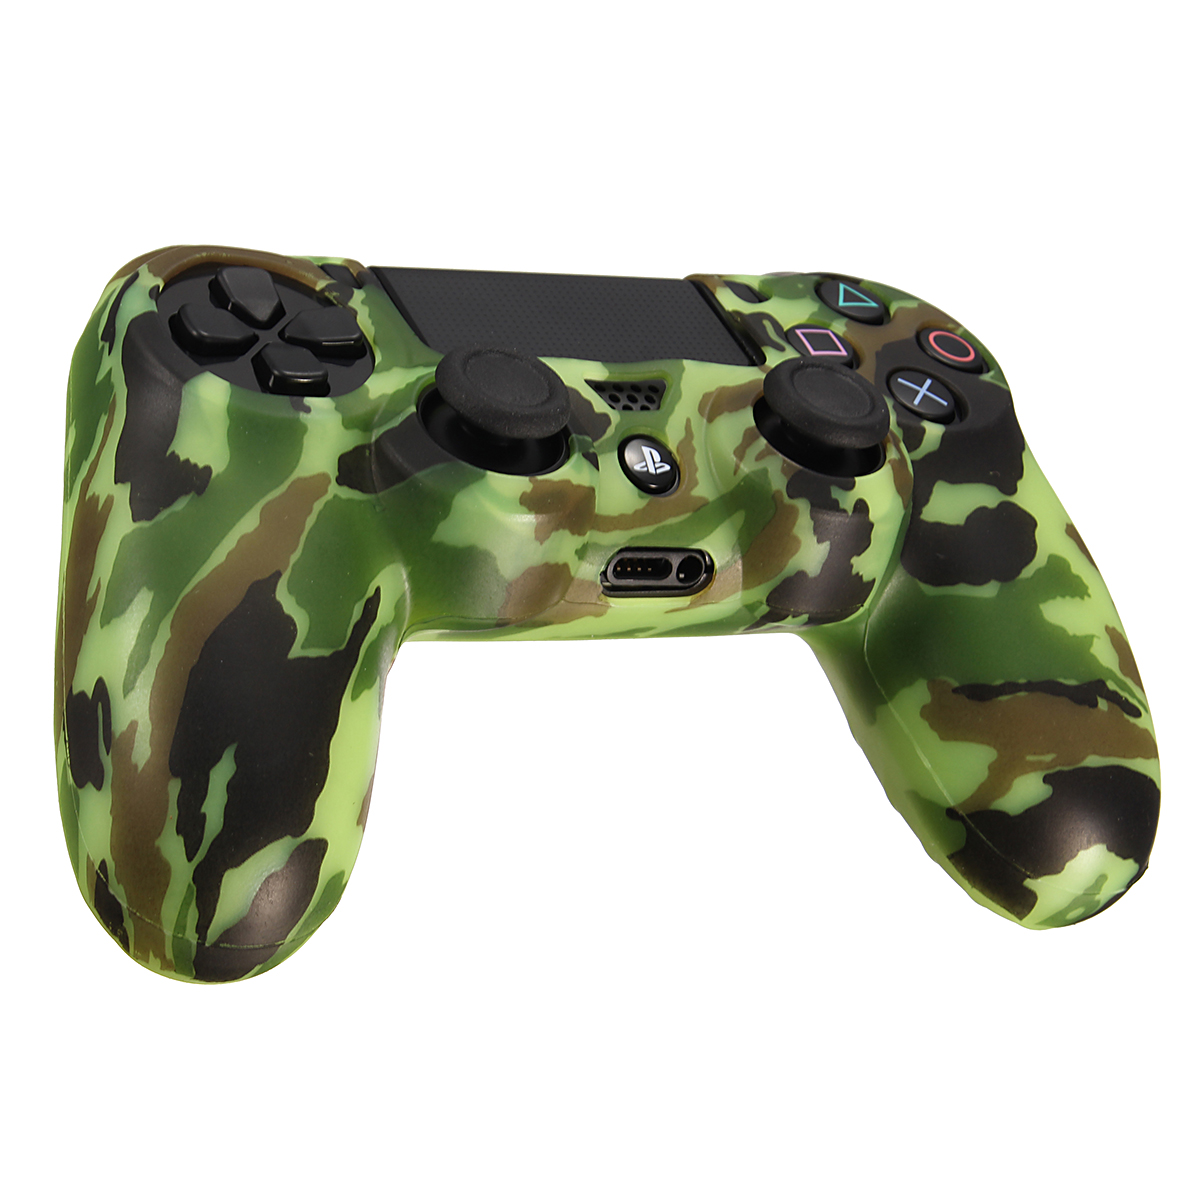 Durable Decal Camouflage Grip Cover Case Silicone Rubber Soft Skin Protector for Playstation 4 for Dualshock 4 Gamepad 11